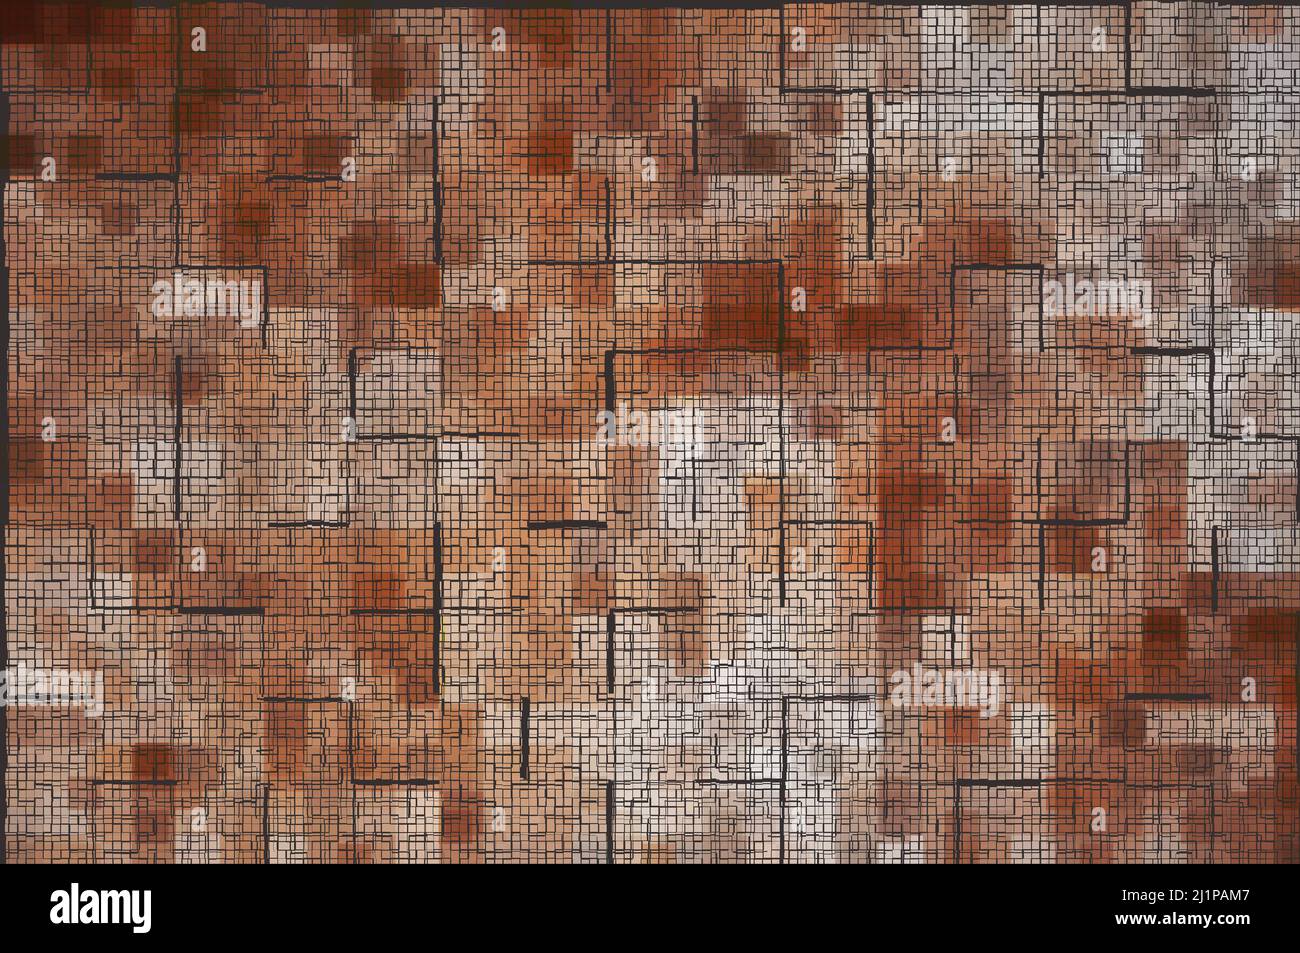 brown color with mosaic pattren background Stock Photo